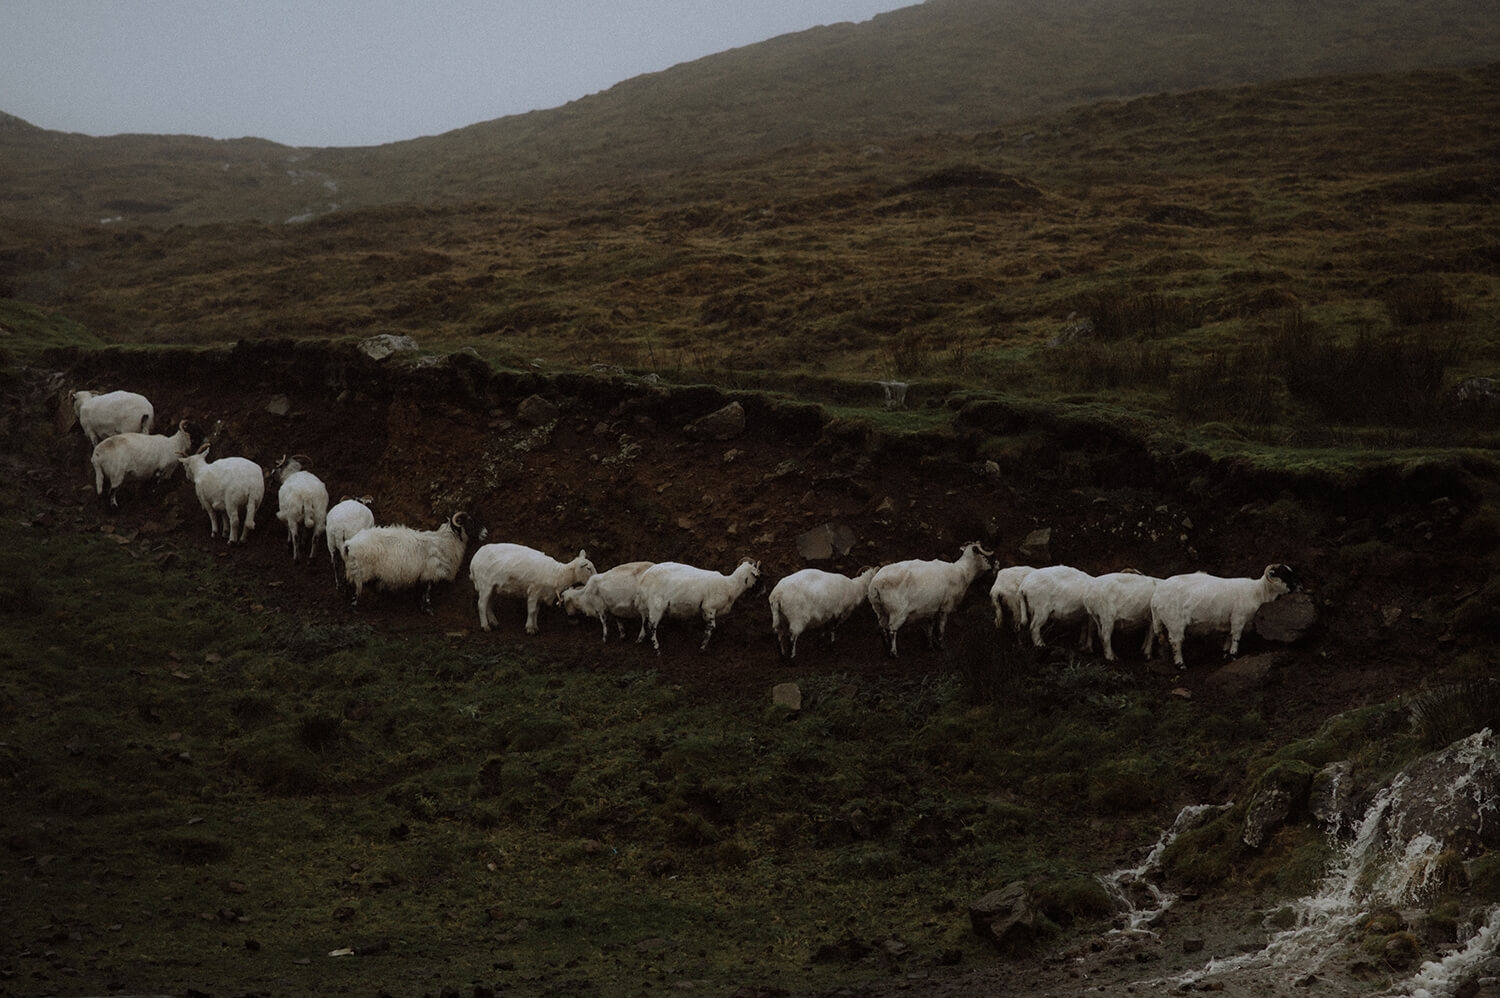 Straight line of sheep in the Scottish highlands on a rainy day.